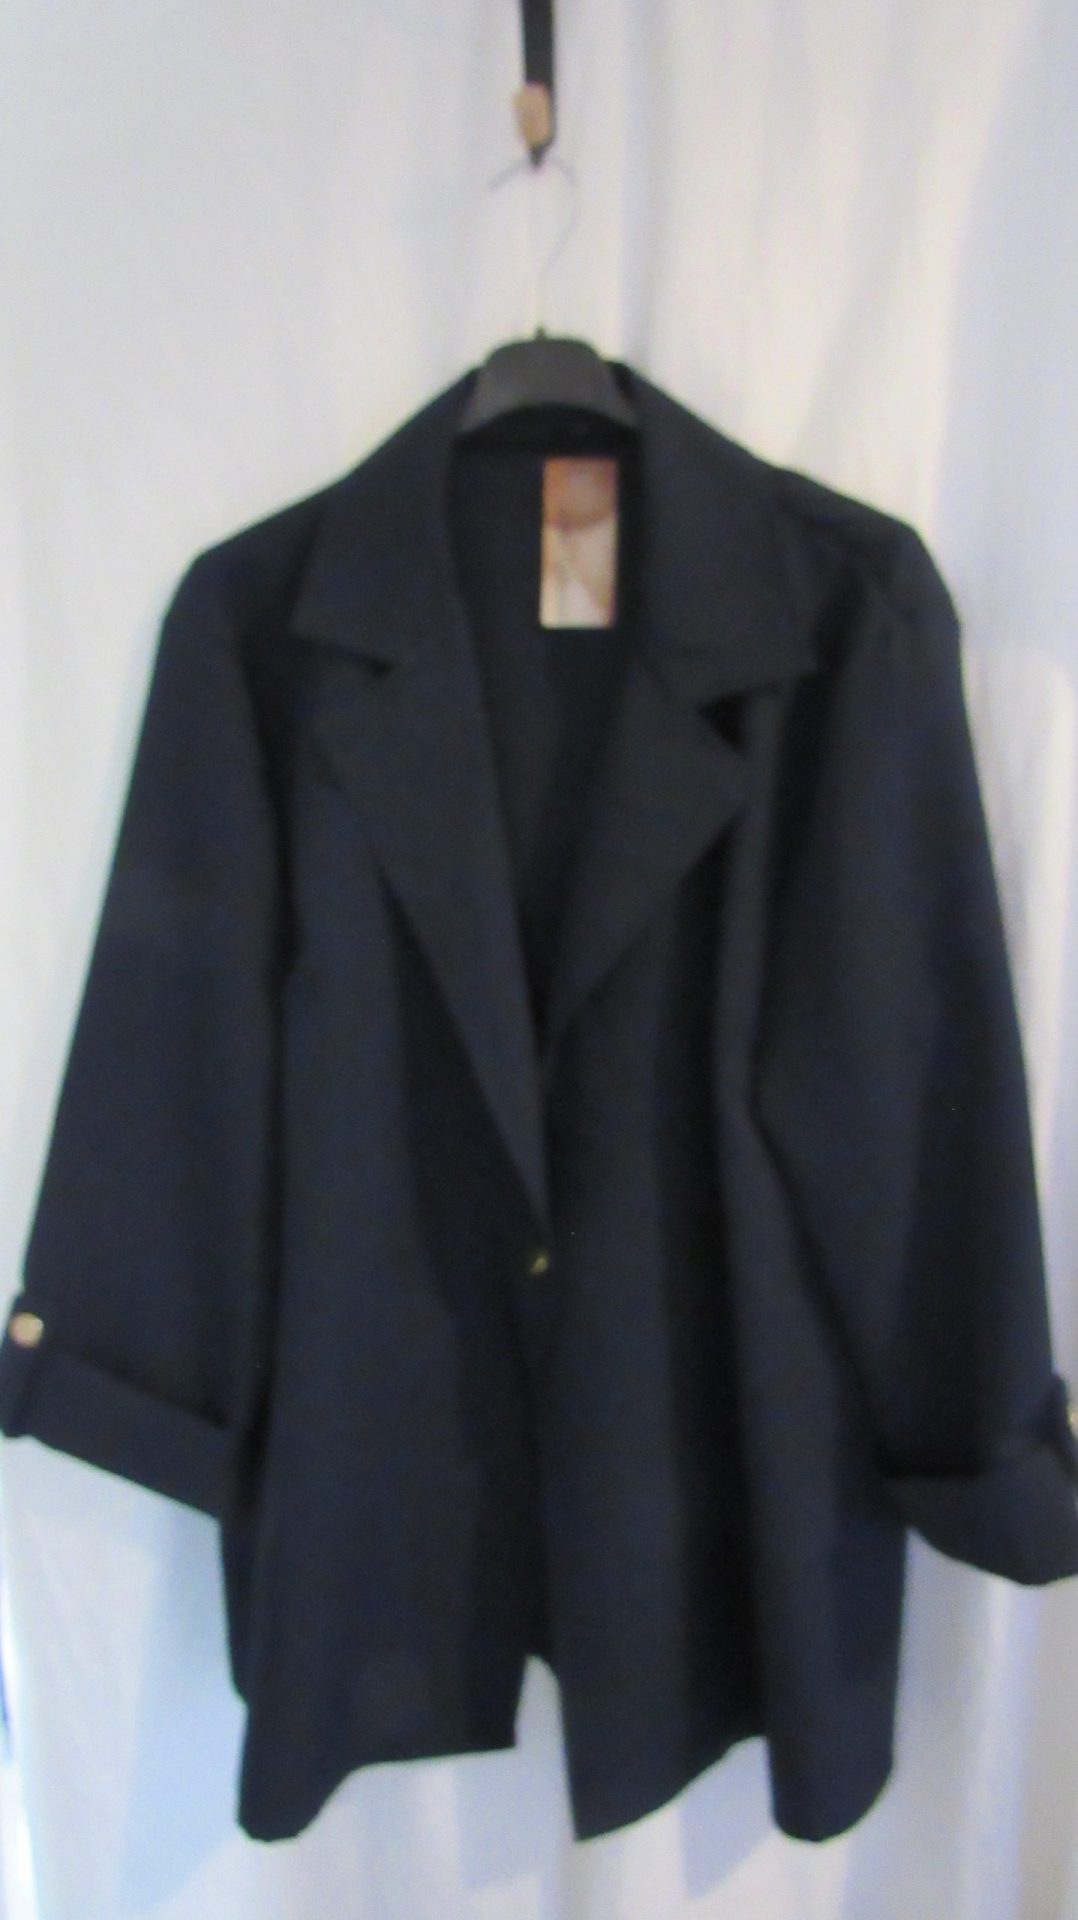 Jackets and Coats at Molly's Clothing - Affordable Women's Clothing